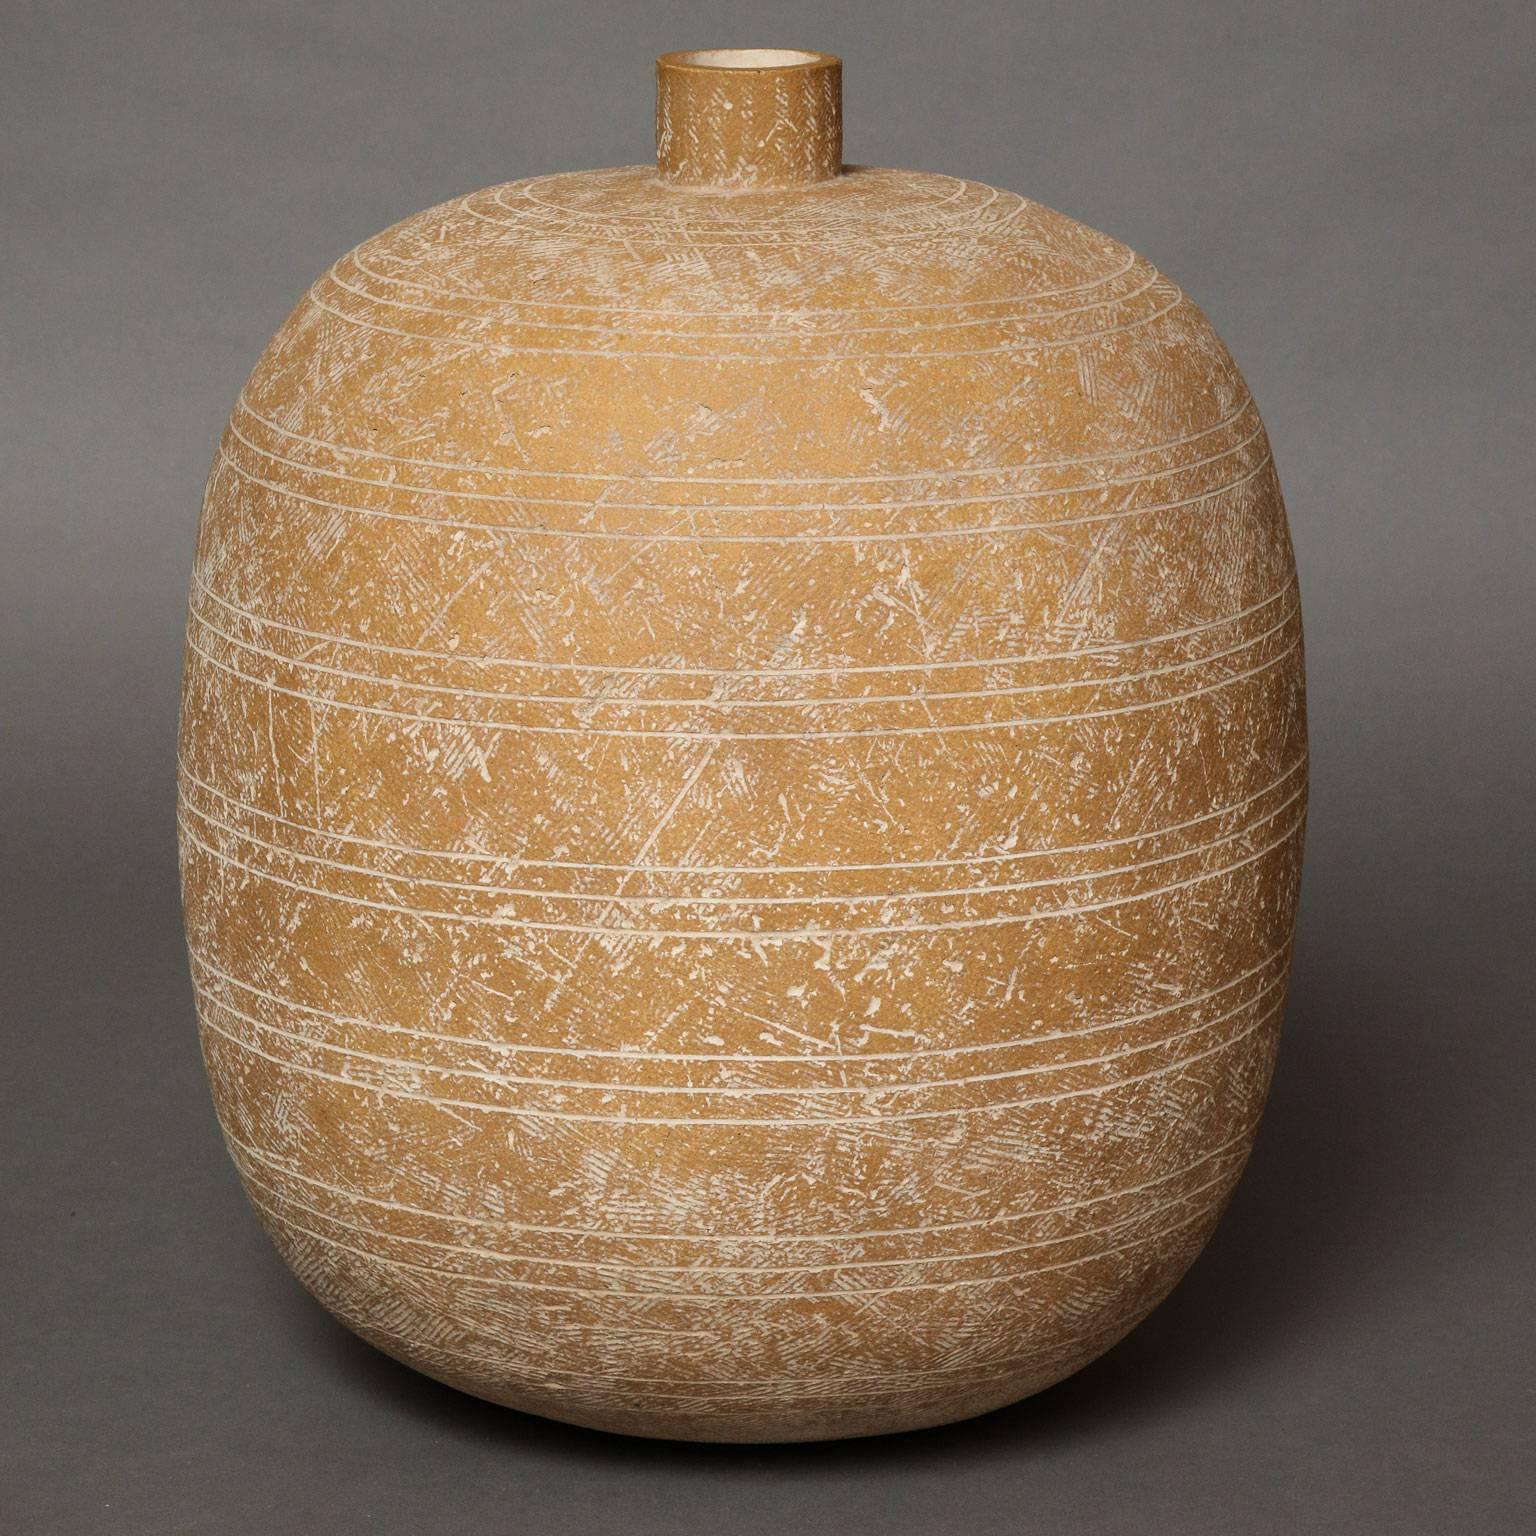 Claude Conover (1907-1994)
"Oaxaca"
Large sculptural unglazed buff colored stoneware vessel, with incised cross-hatch textured surface with matte white details. 
Signed: Claude Conover “Oaxaca”
American, circa 1965

Measurements: